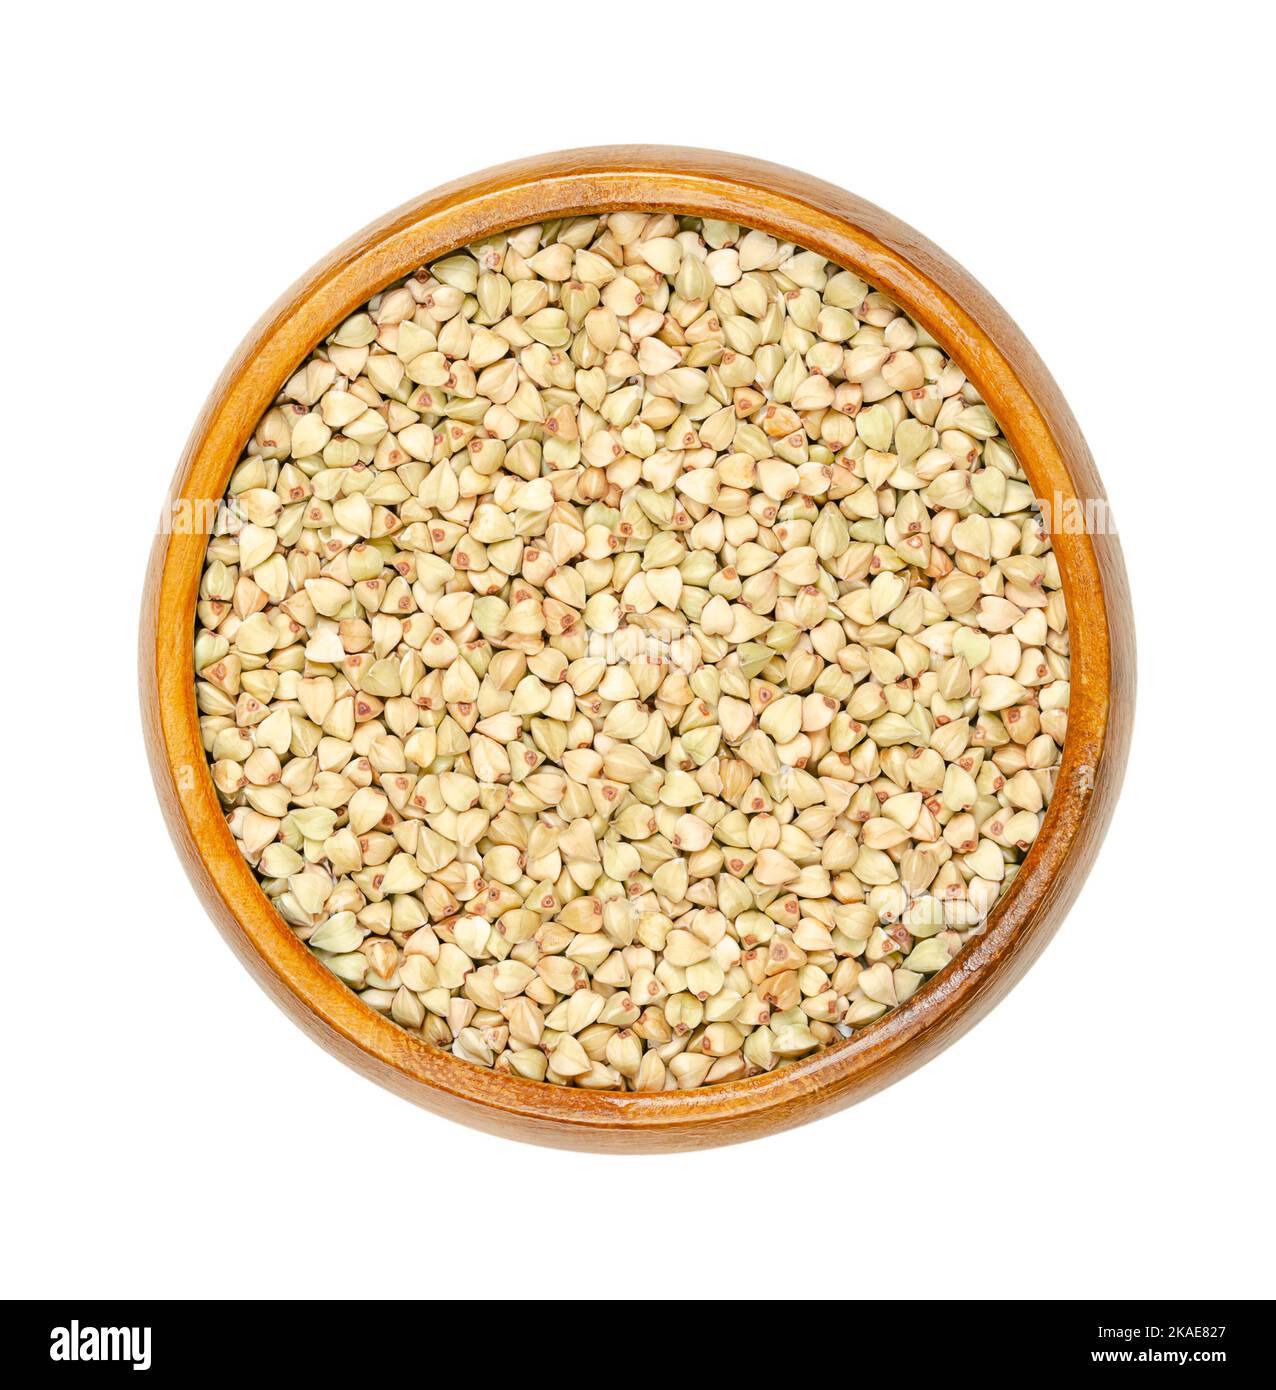 Common buckwheat grains in a wooden bowl. Hulled seeds of Fagopyrum esculentum, also known as Japanese or silverhull buckwheat. Stock Photo